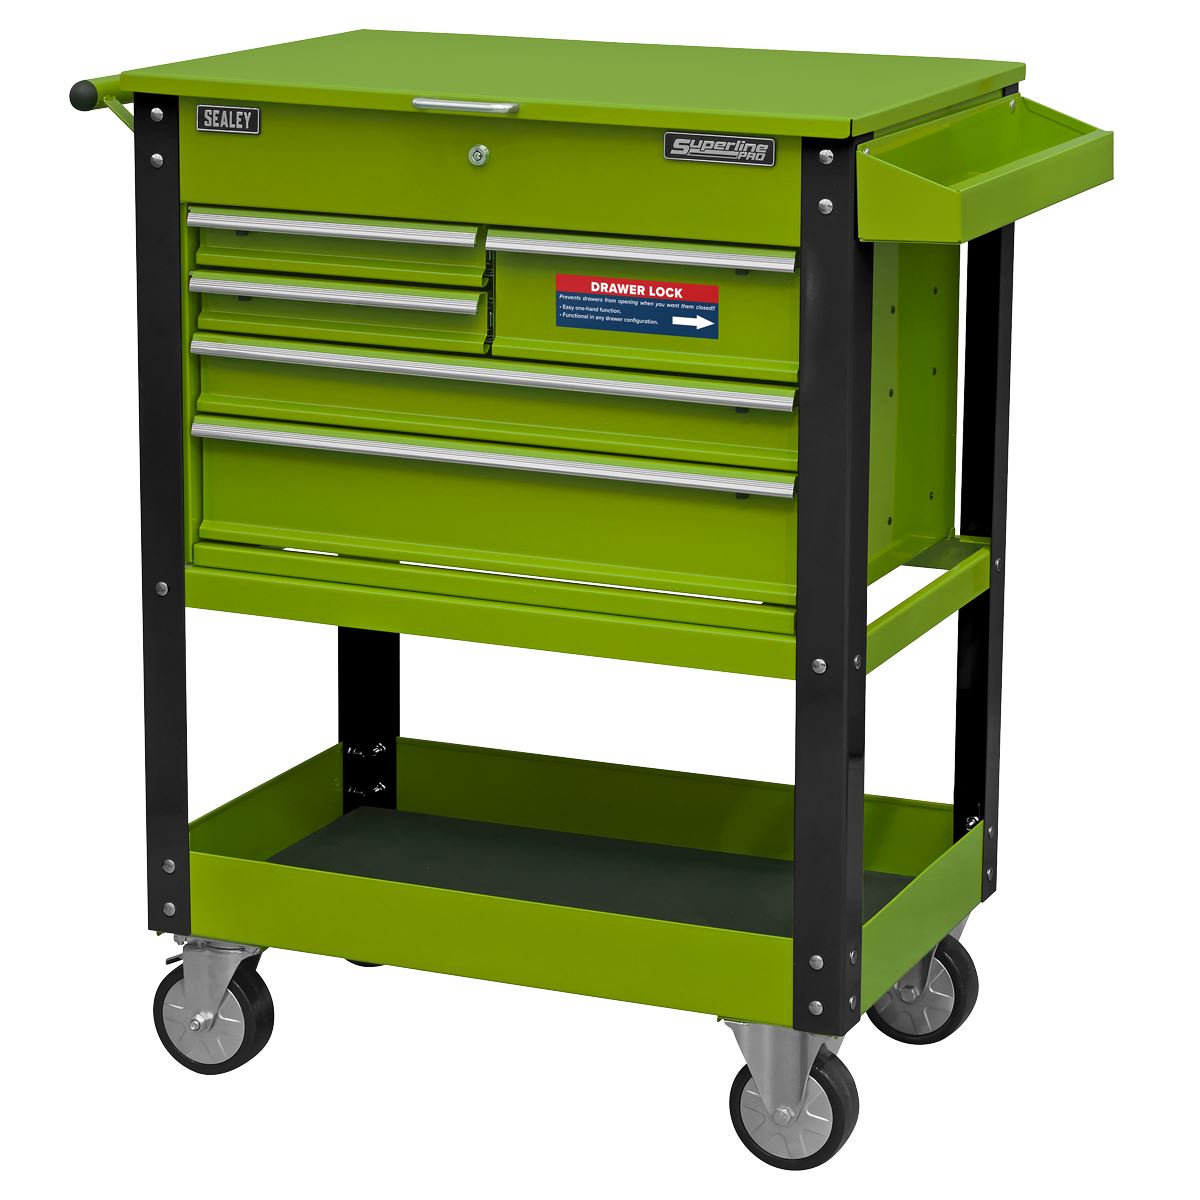 Sealey Superline Pro Heavy-Duty Mobile Tool & Parts Trolley with 5 Drawers and Lockable Top- Hi-Vis Green